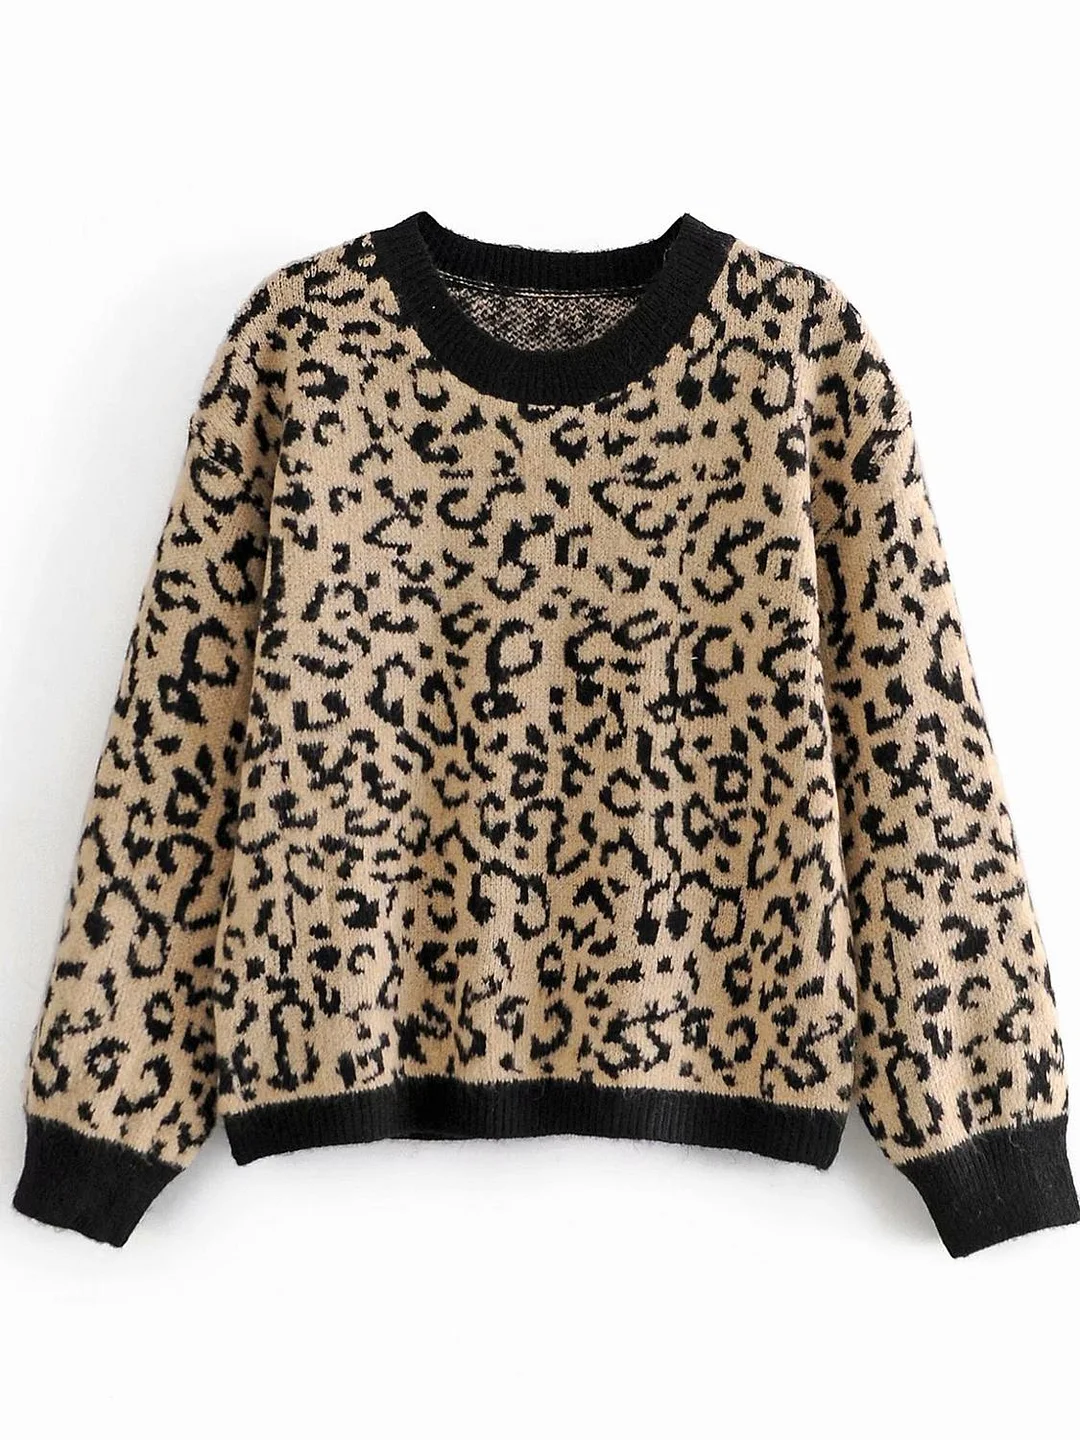 Women 2020 Fashion Leopard Print Loose Knitted Sweater Vintage Long Sleeve Animal Pattern Female Pullovers Chic Tops